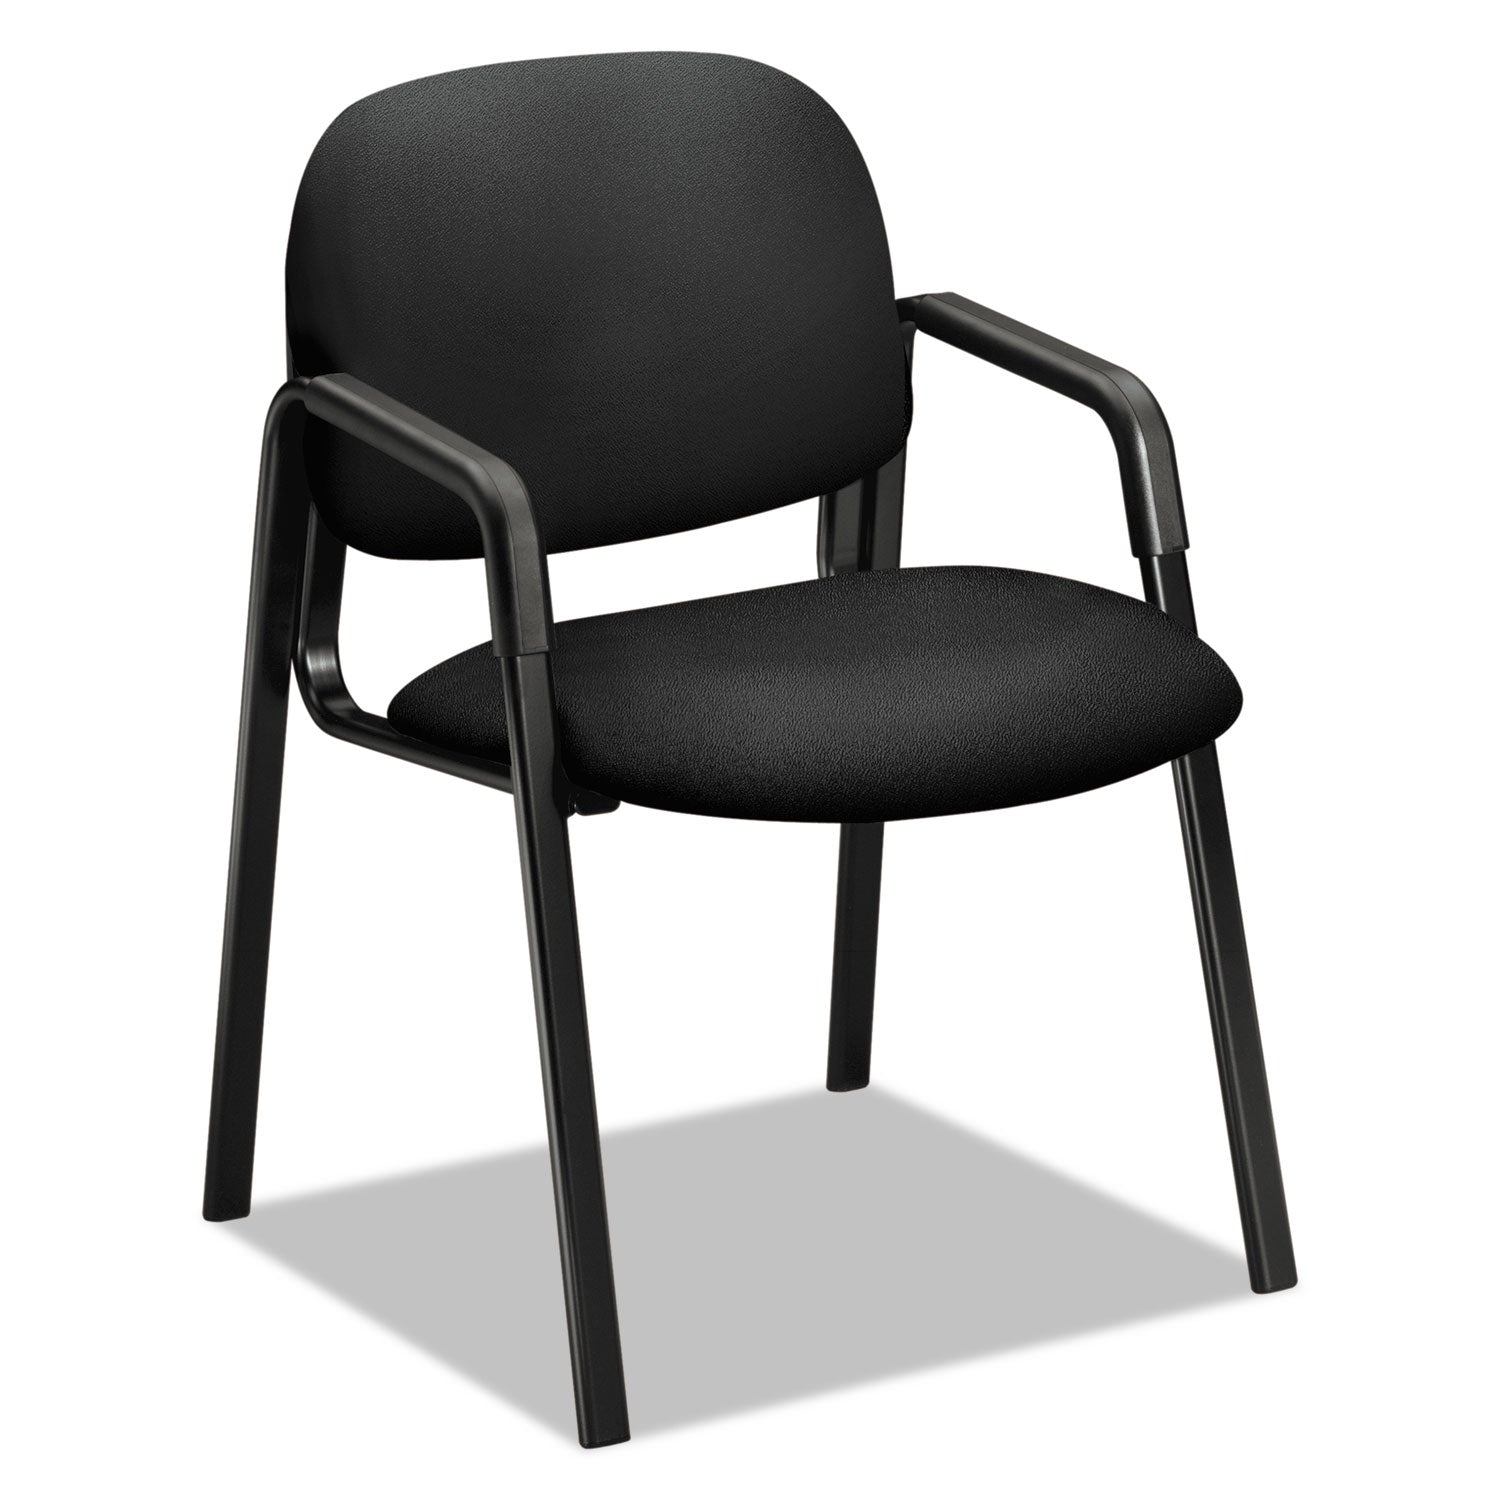 solutions-seating-4000-series-leg-base-guest-chair-fabric-upholstery-235-x-245-x-32-black-seat-back-black-base_hon4003cu10t - 1